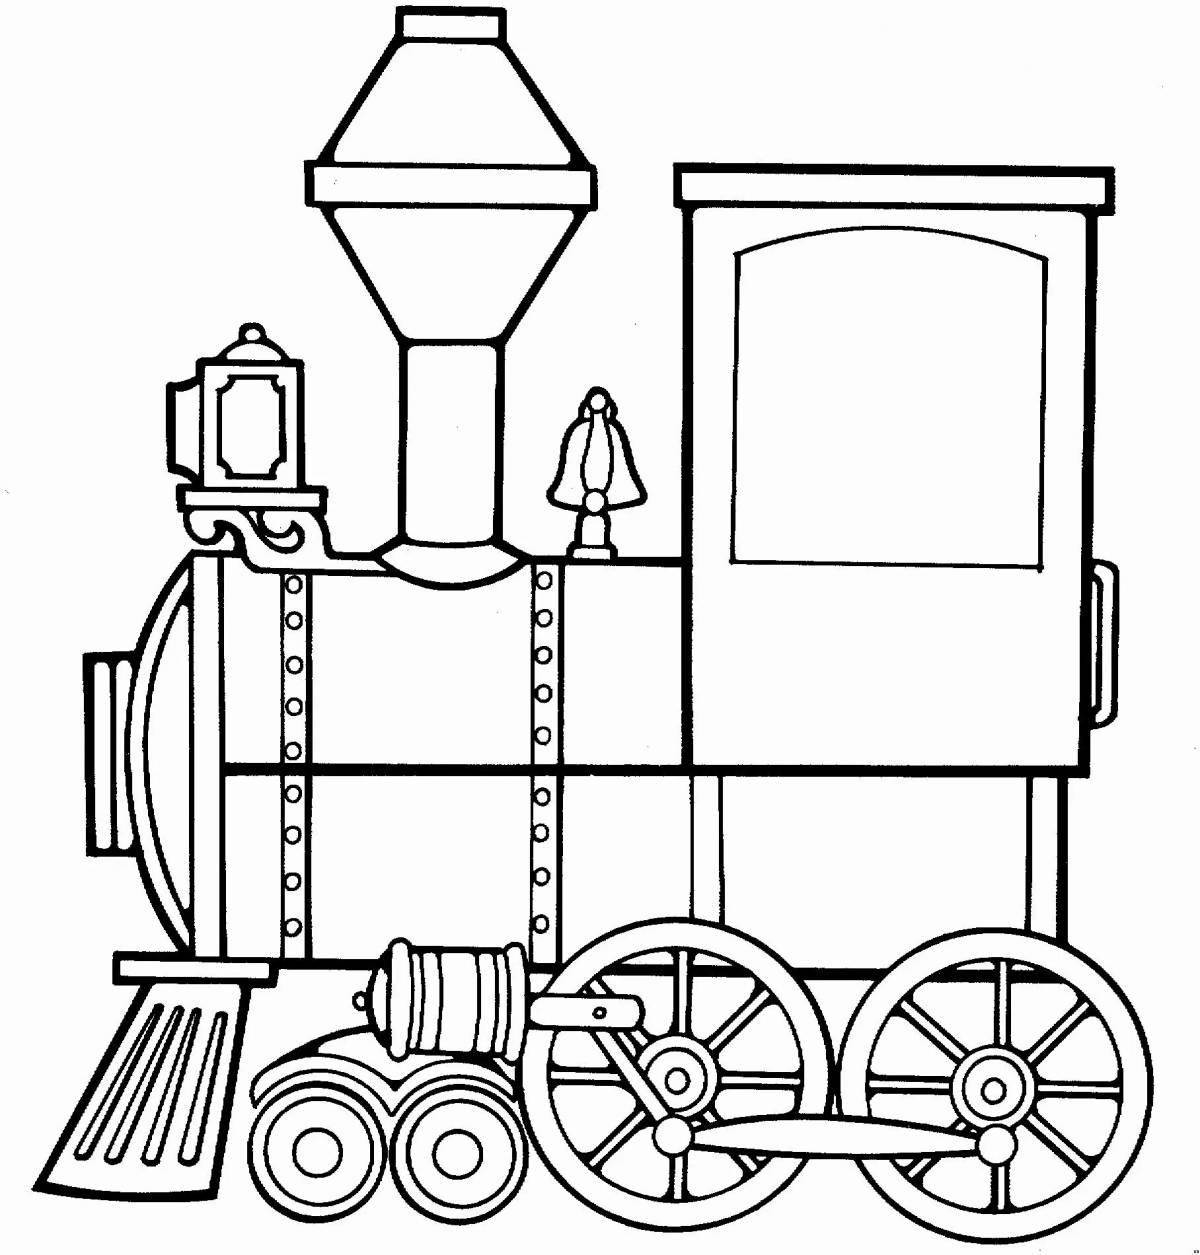 Colorful locomotive coloring page